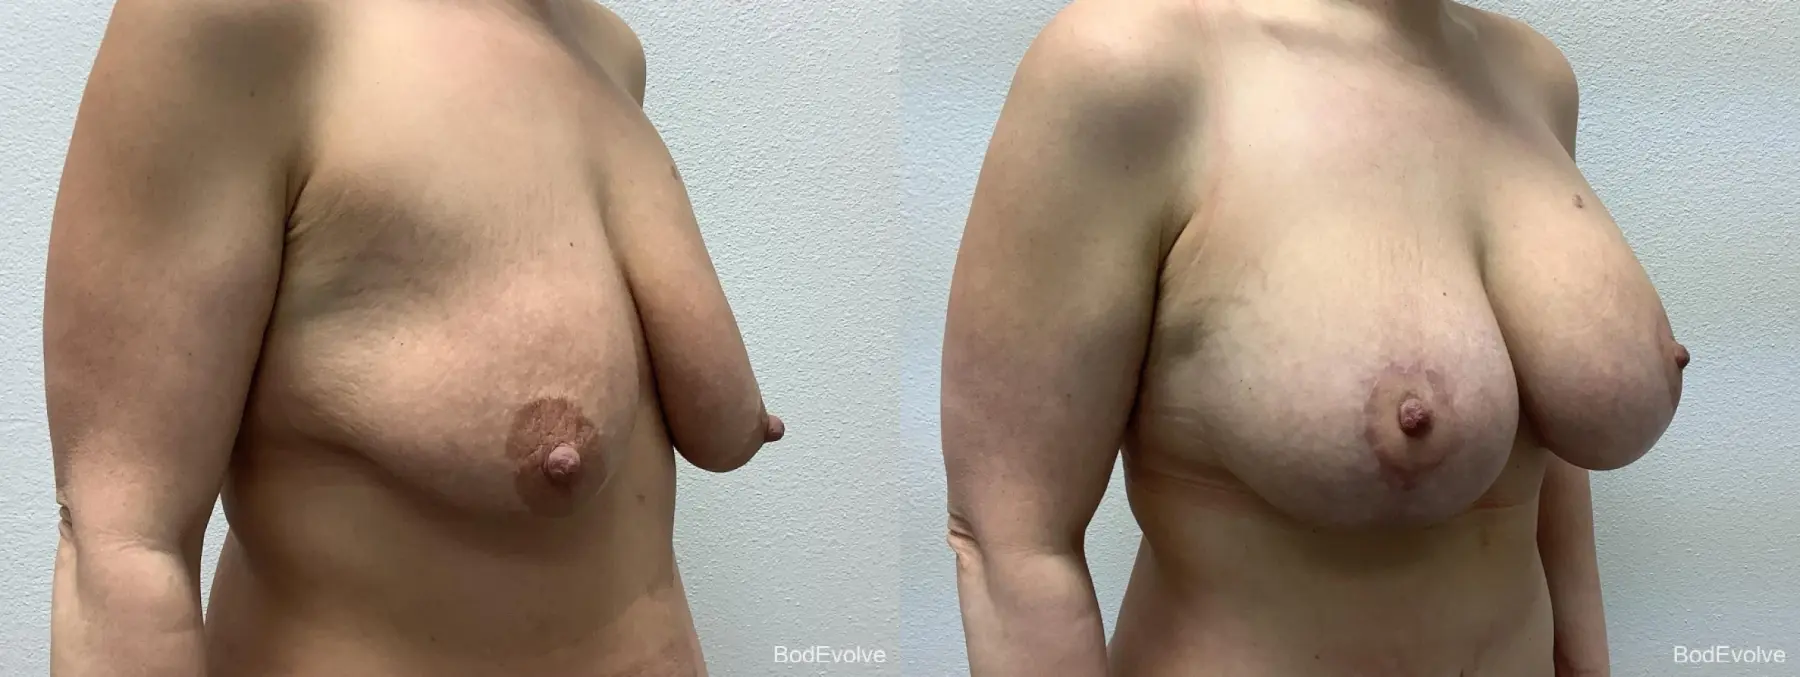 Breast Augmentation With Lift: Patient 1 - Before and After 4